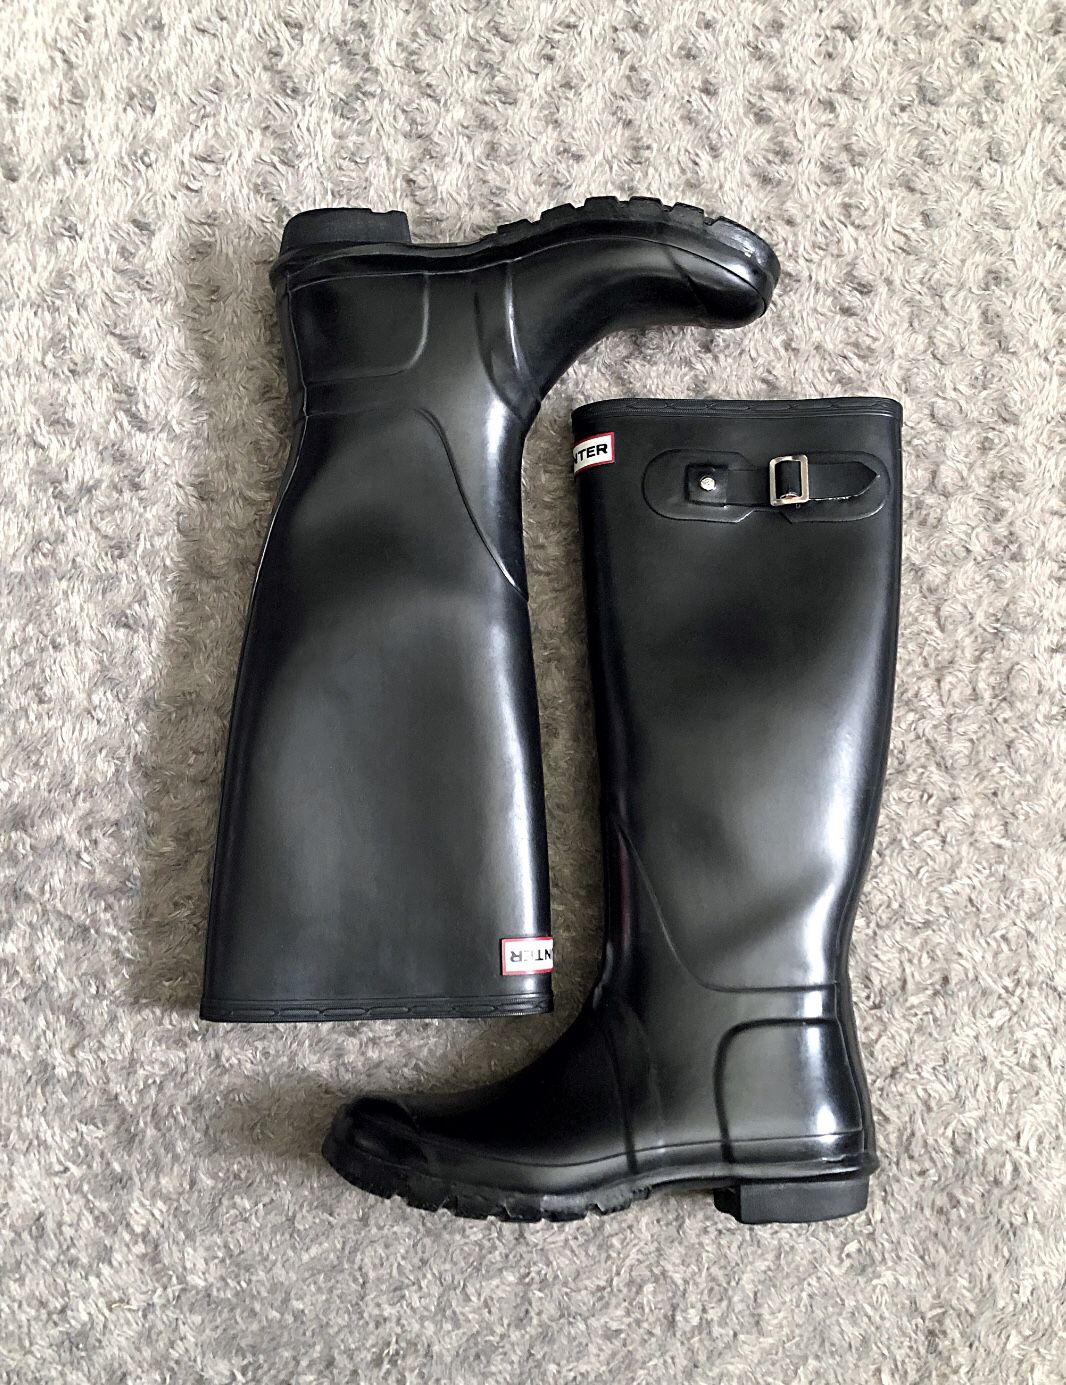 Women’s Hunter Original Tall rain boots size 9 Retail $150 Great condition! Color black. Great boots & classic style.